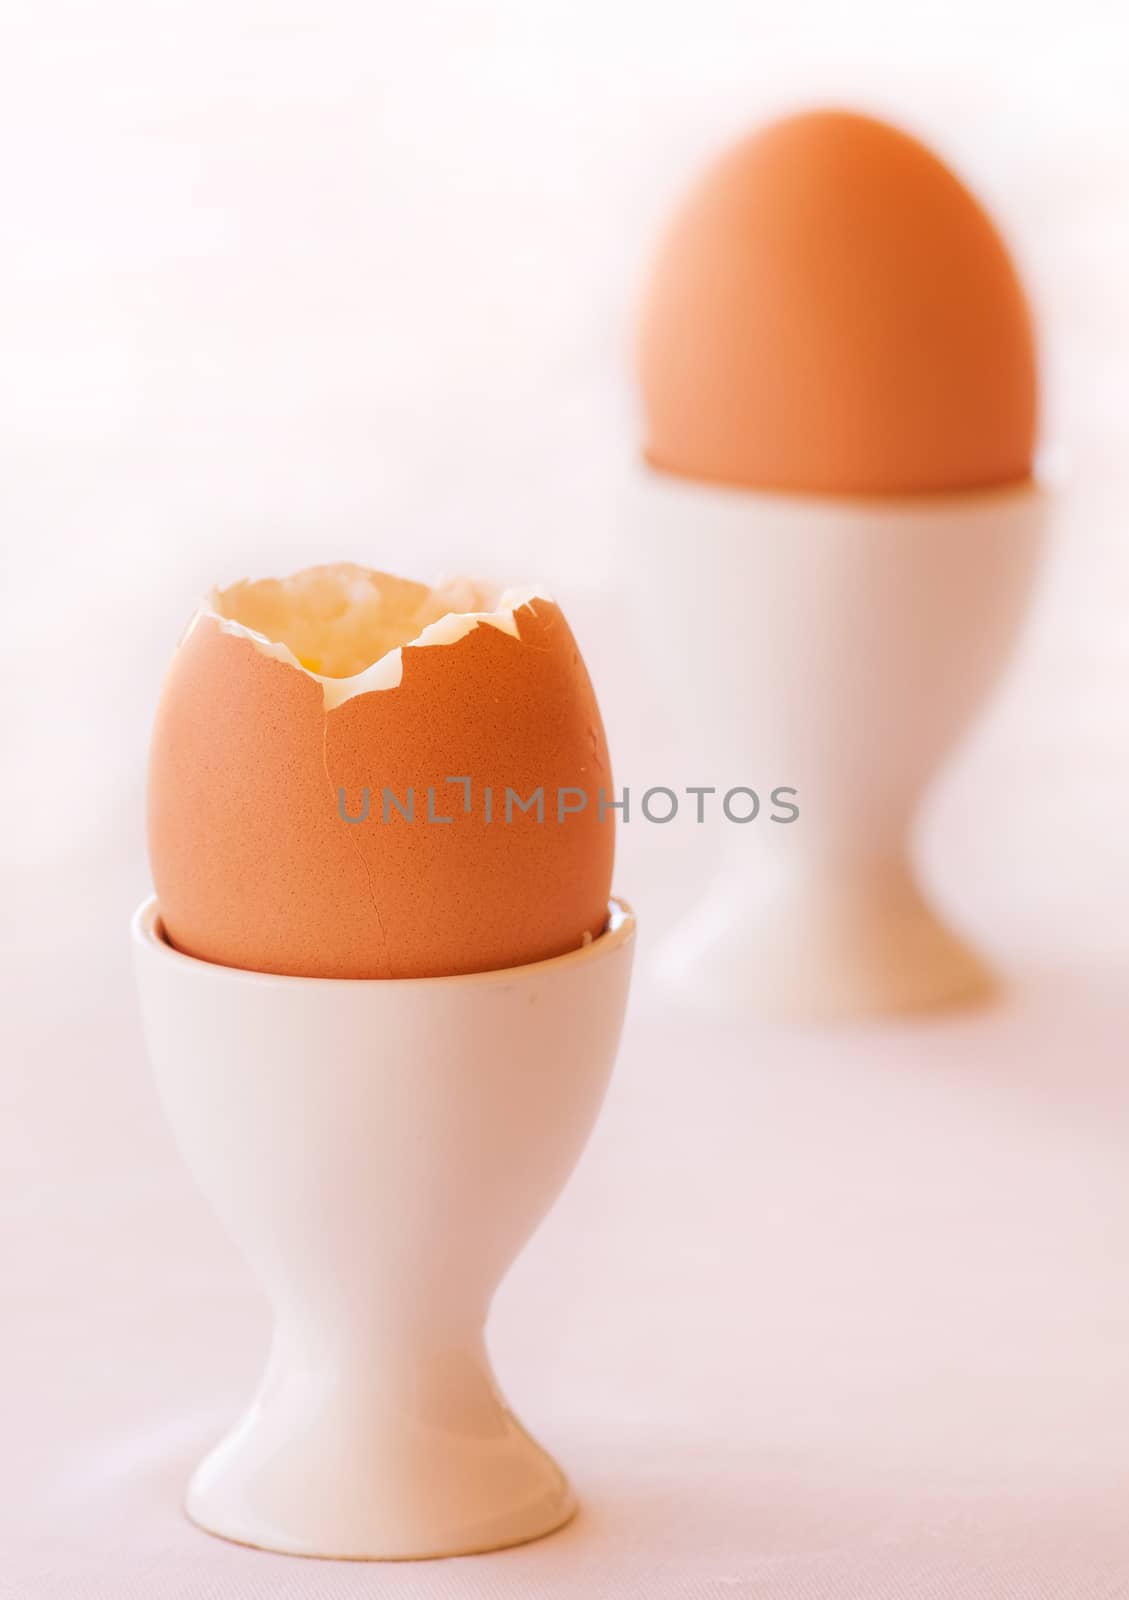 Boiled Egg isolated on a white background